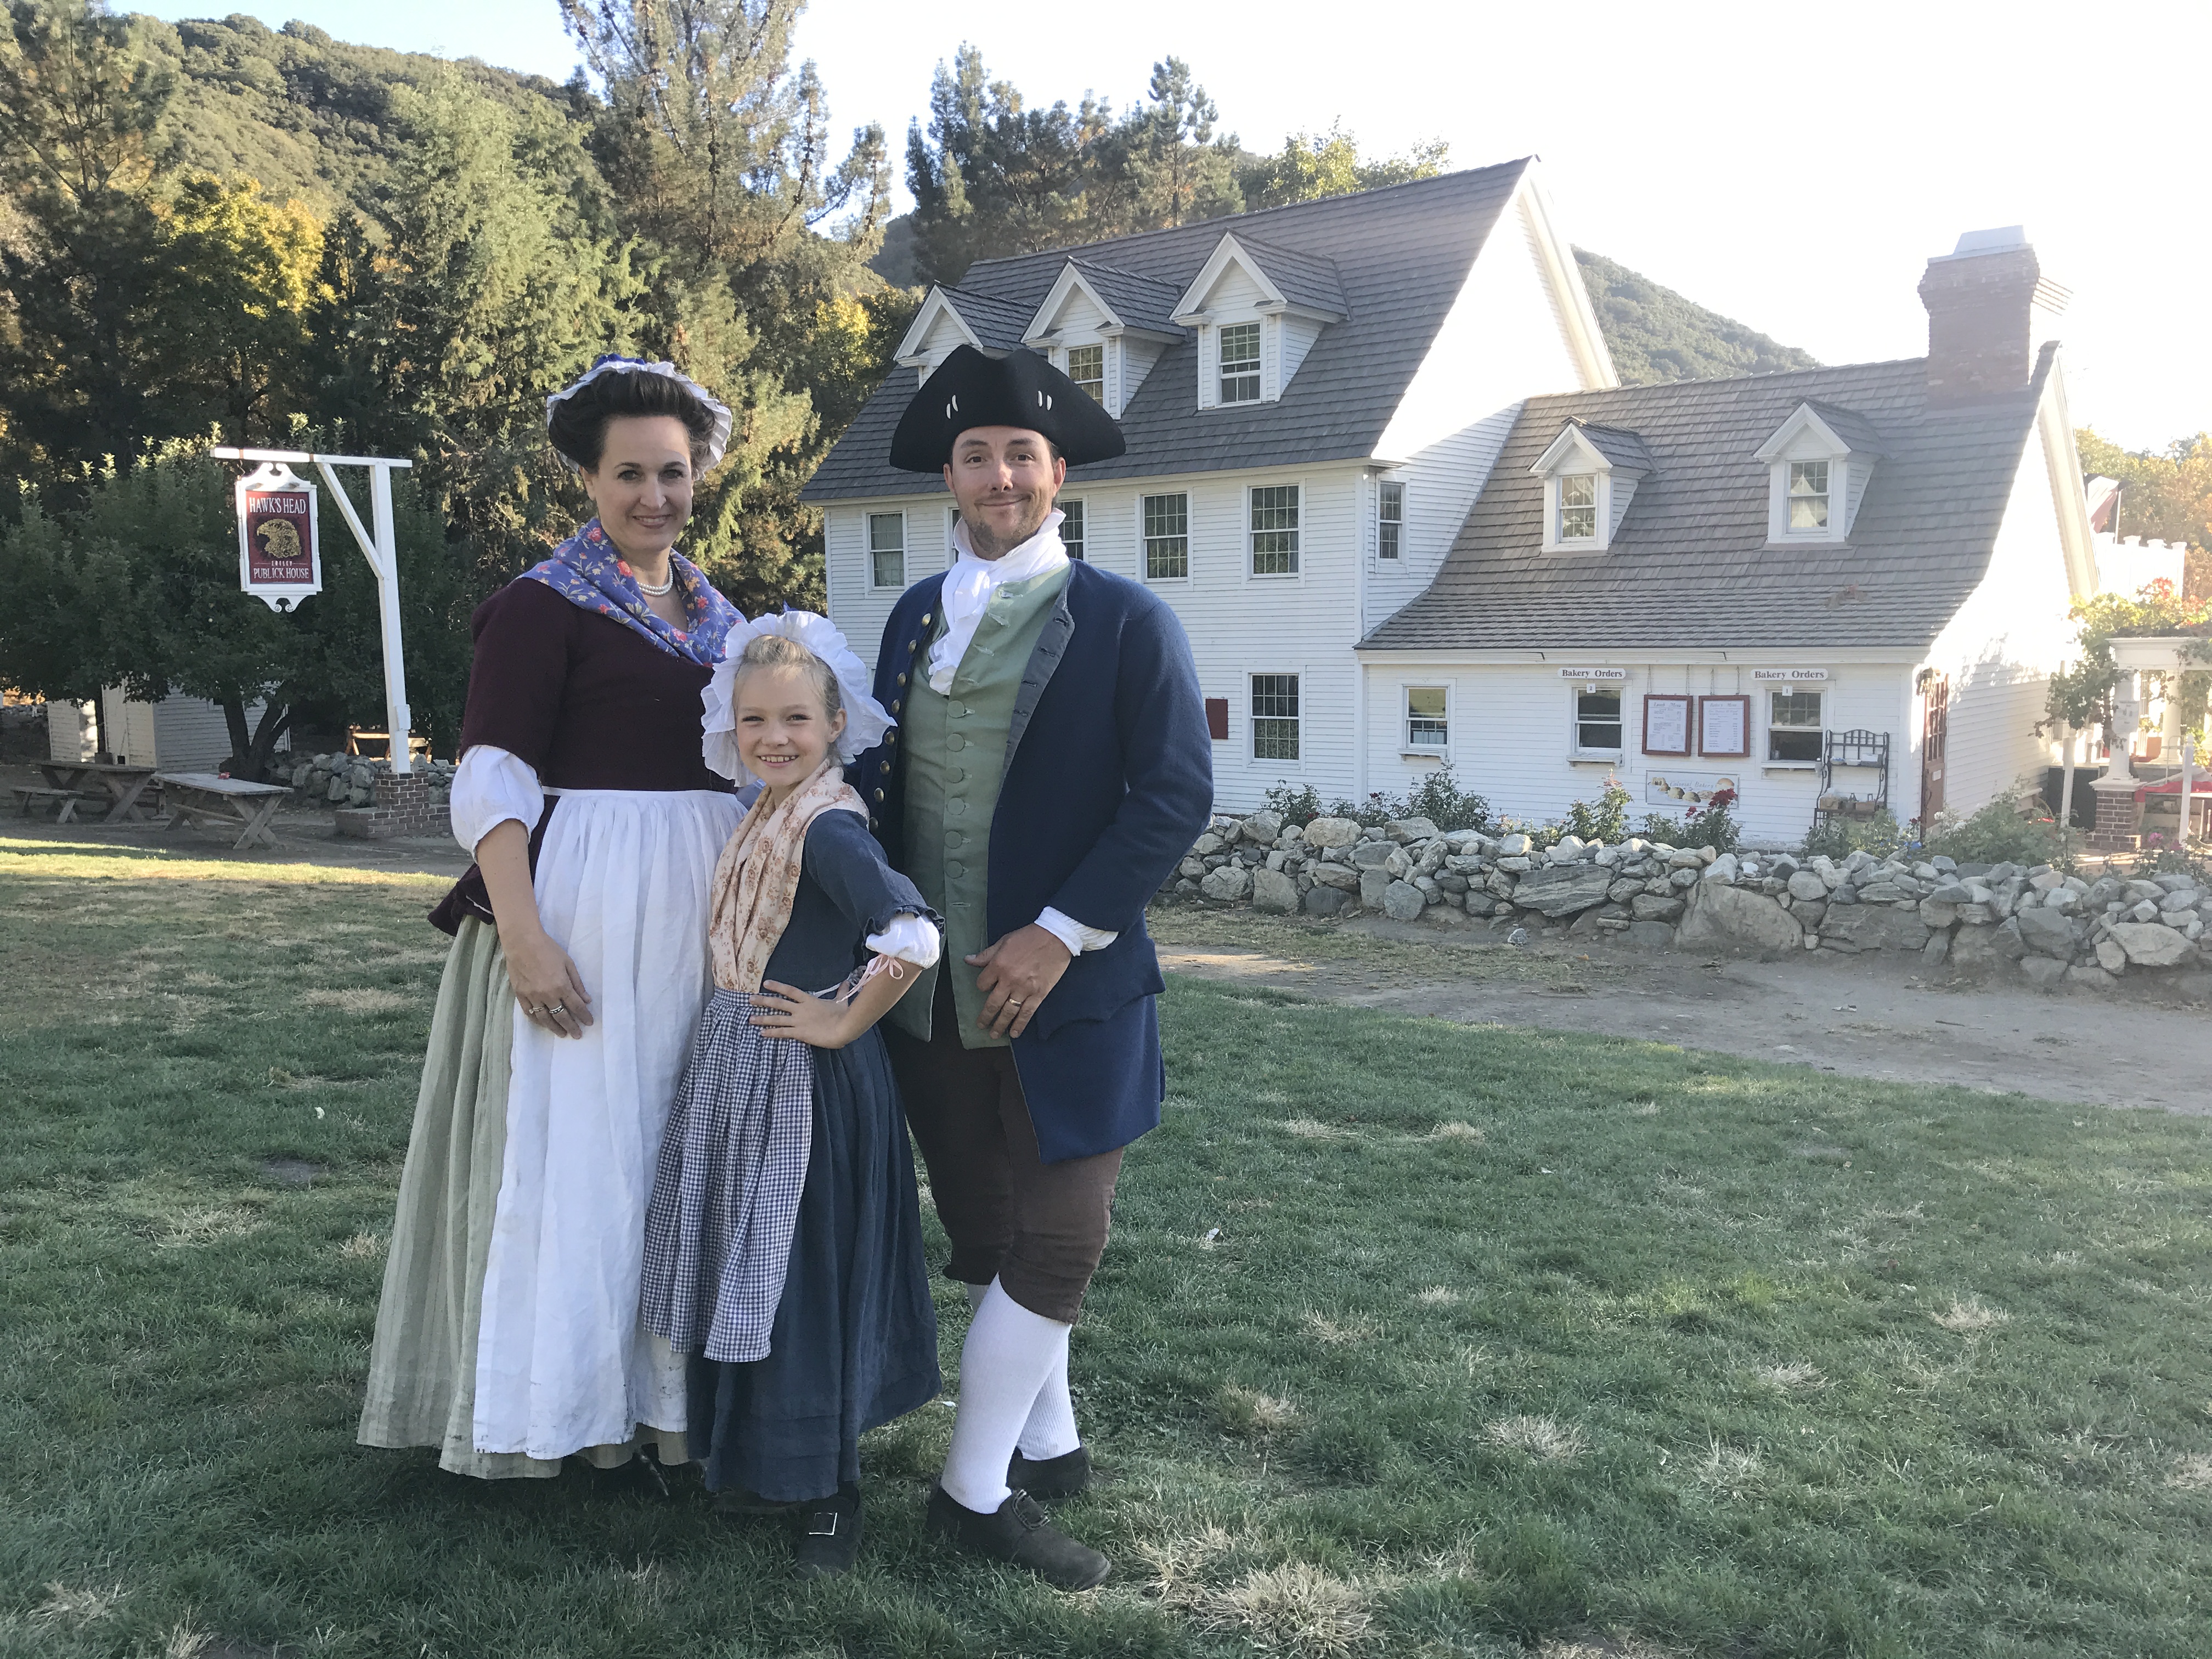 Tousey family dressed in Colonial costumes.